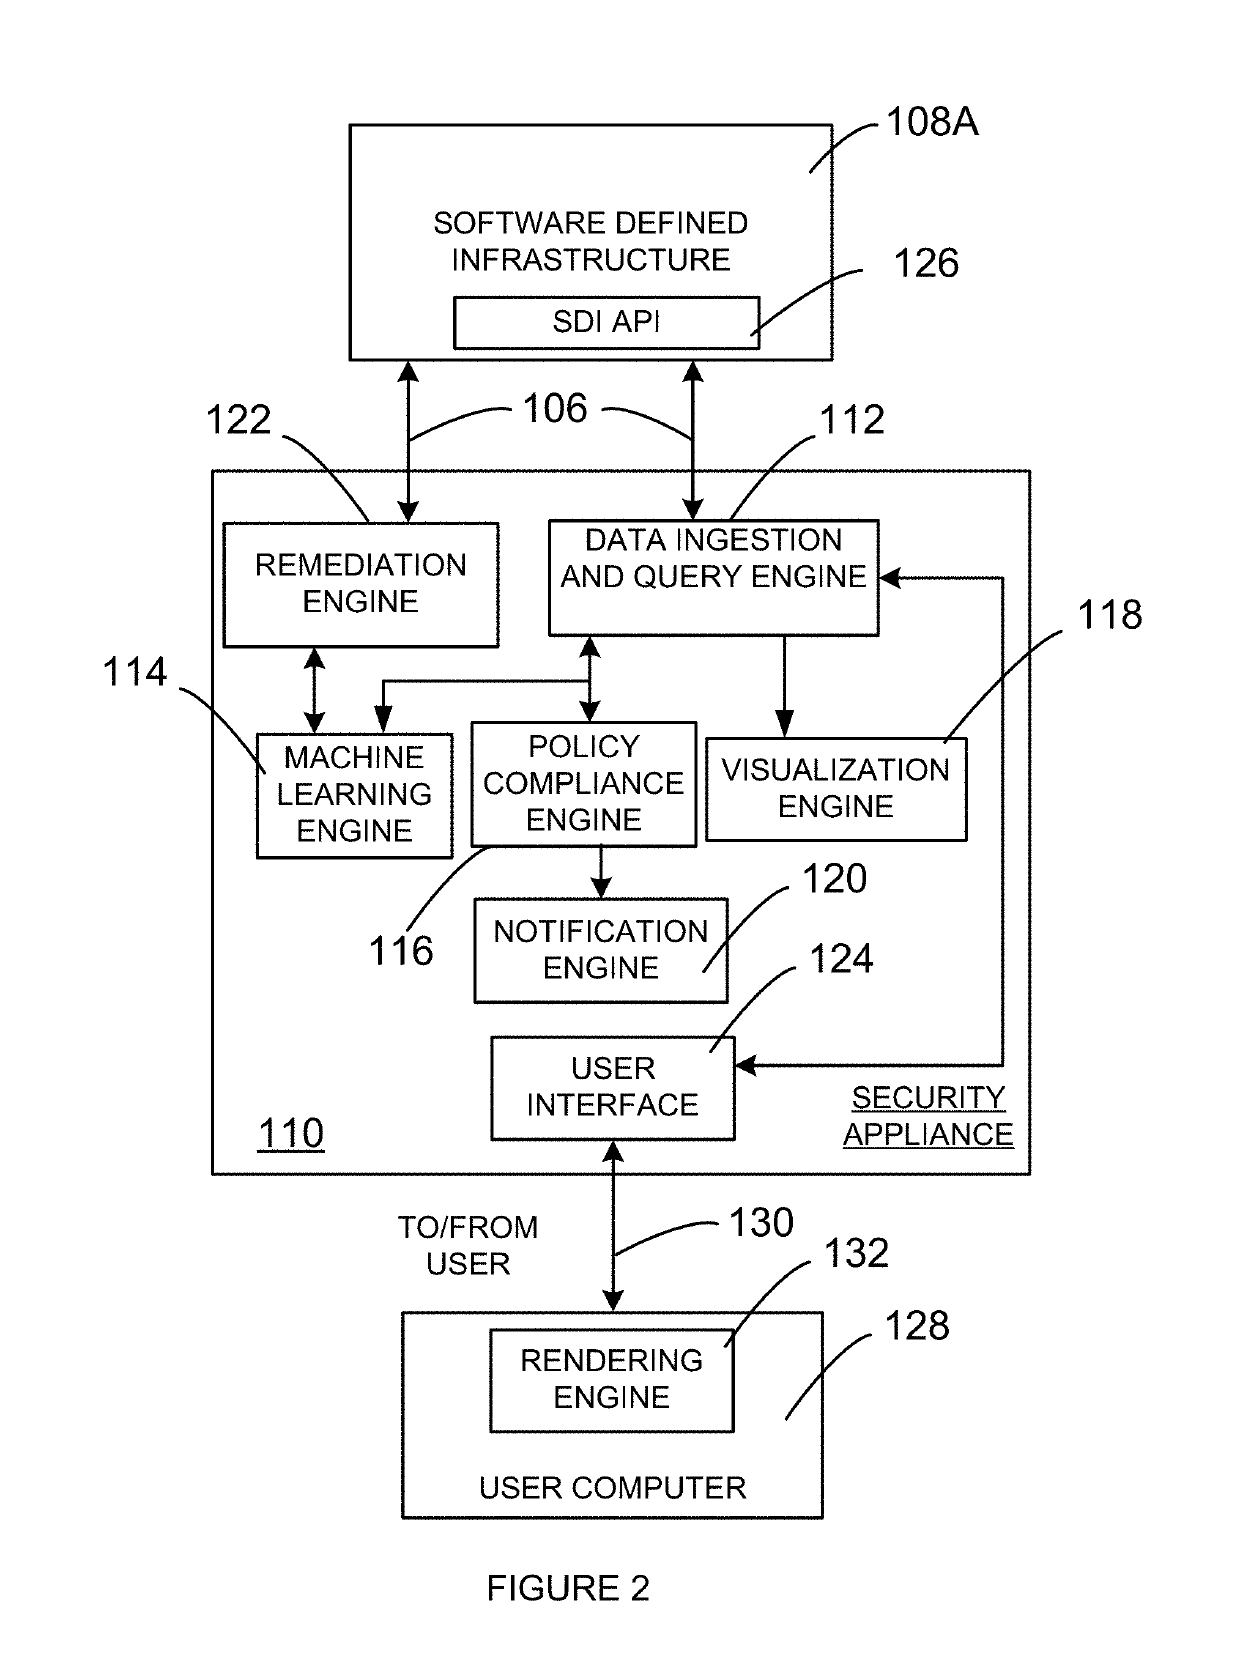 Security appliance to monitor networked computing environment